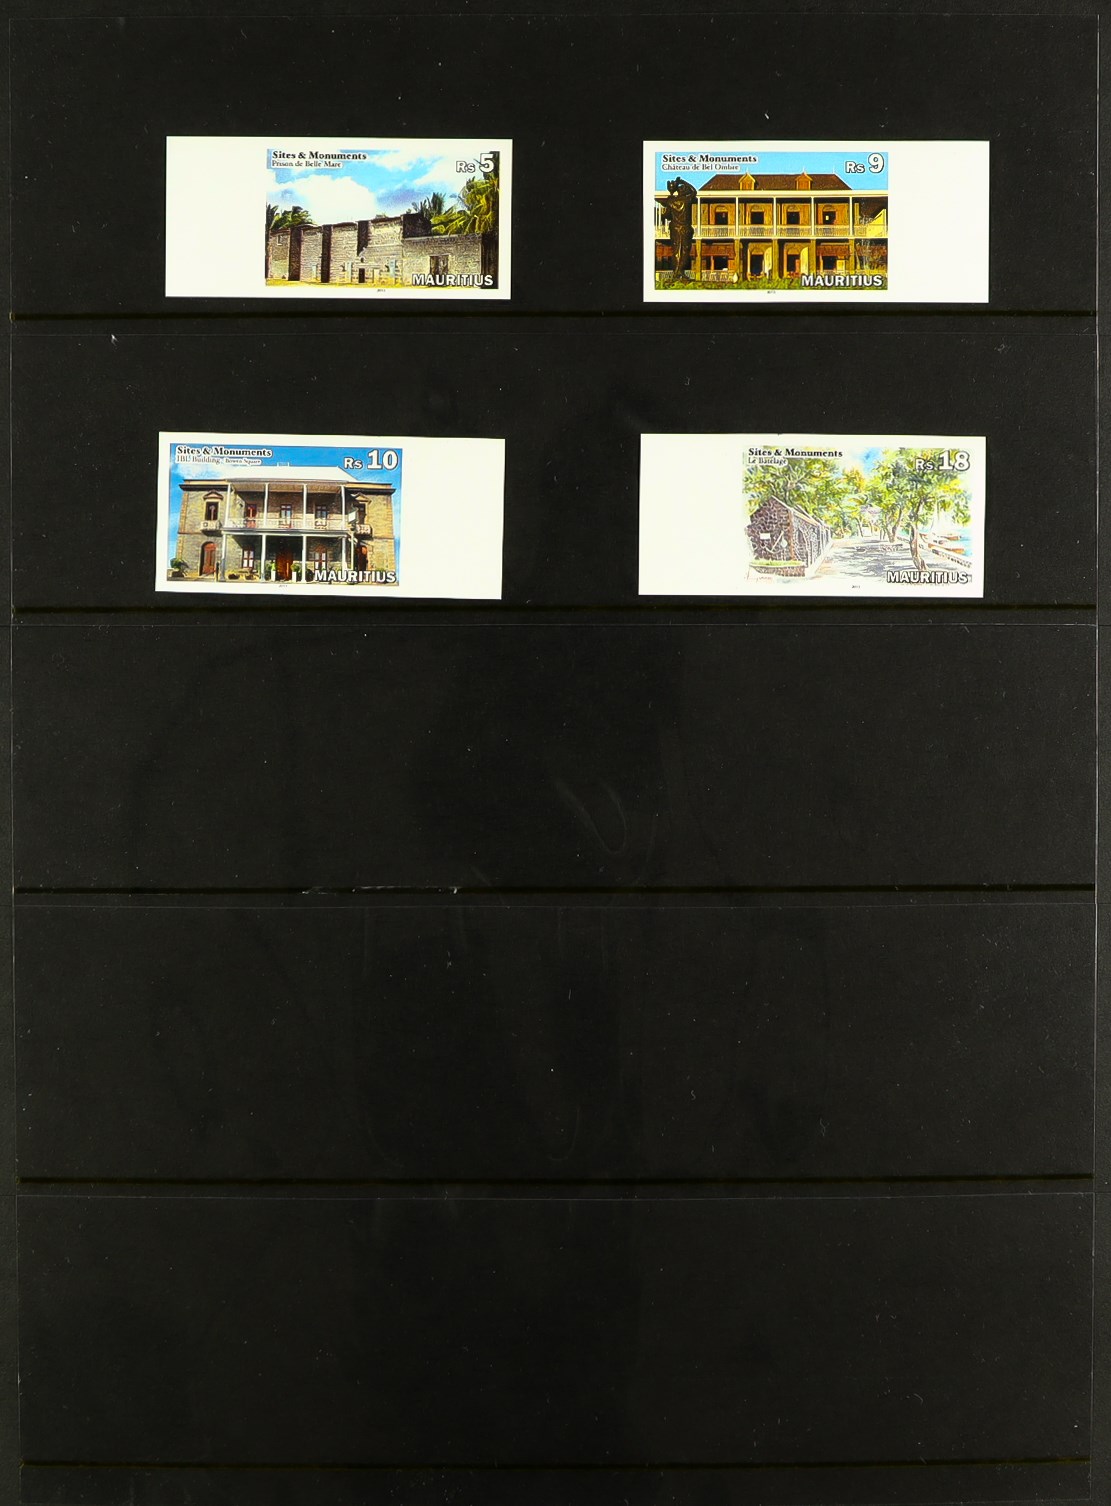 MAURITIUS 2005 - 2013 IMPERFORATE PROOFS of the 2005 Round Island set, 2006 Bicentenary of Mahebourg - Image 3 of 3